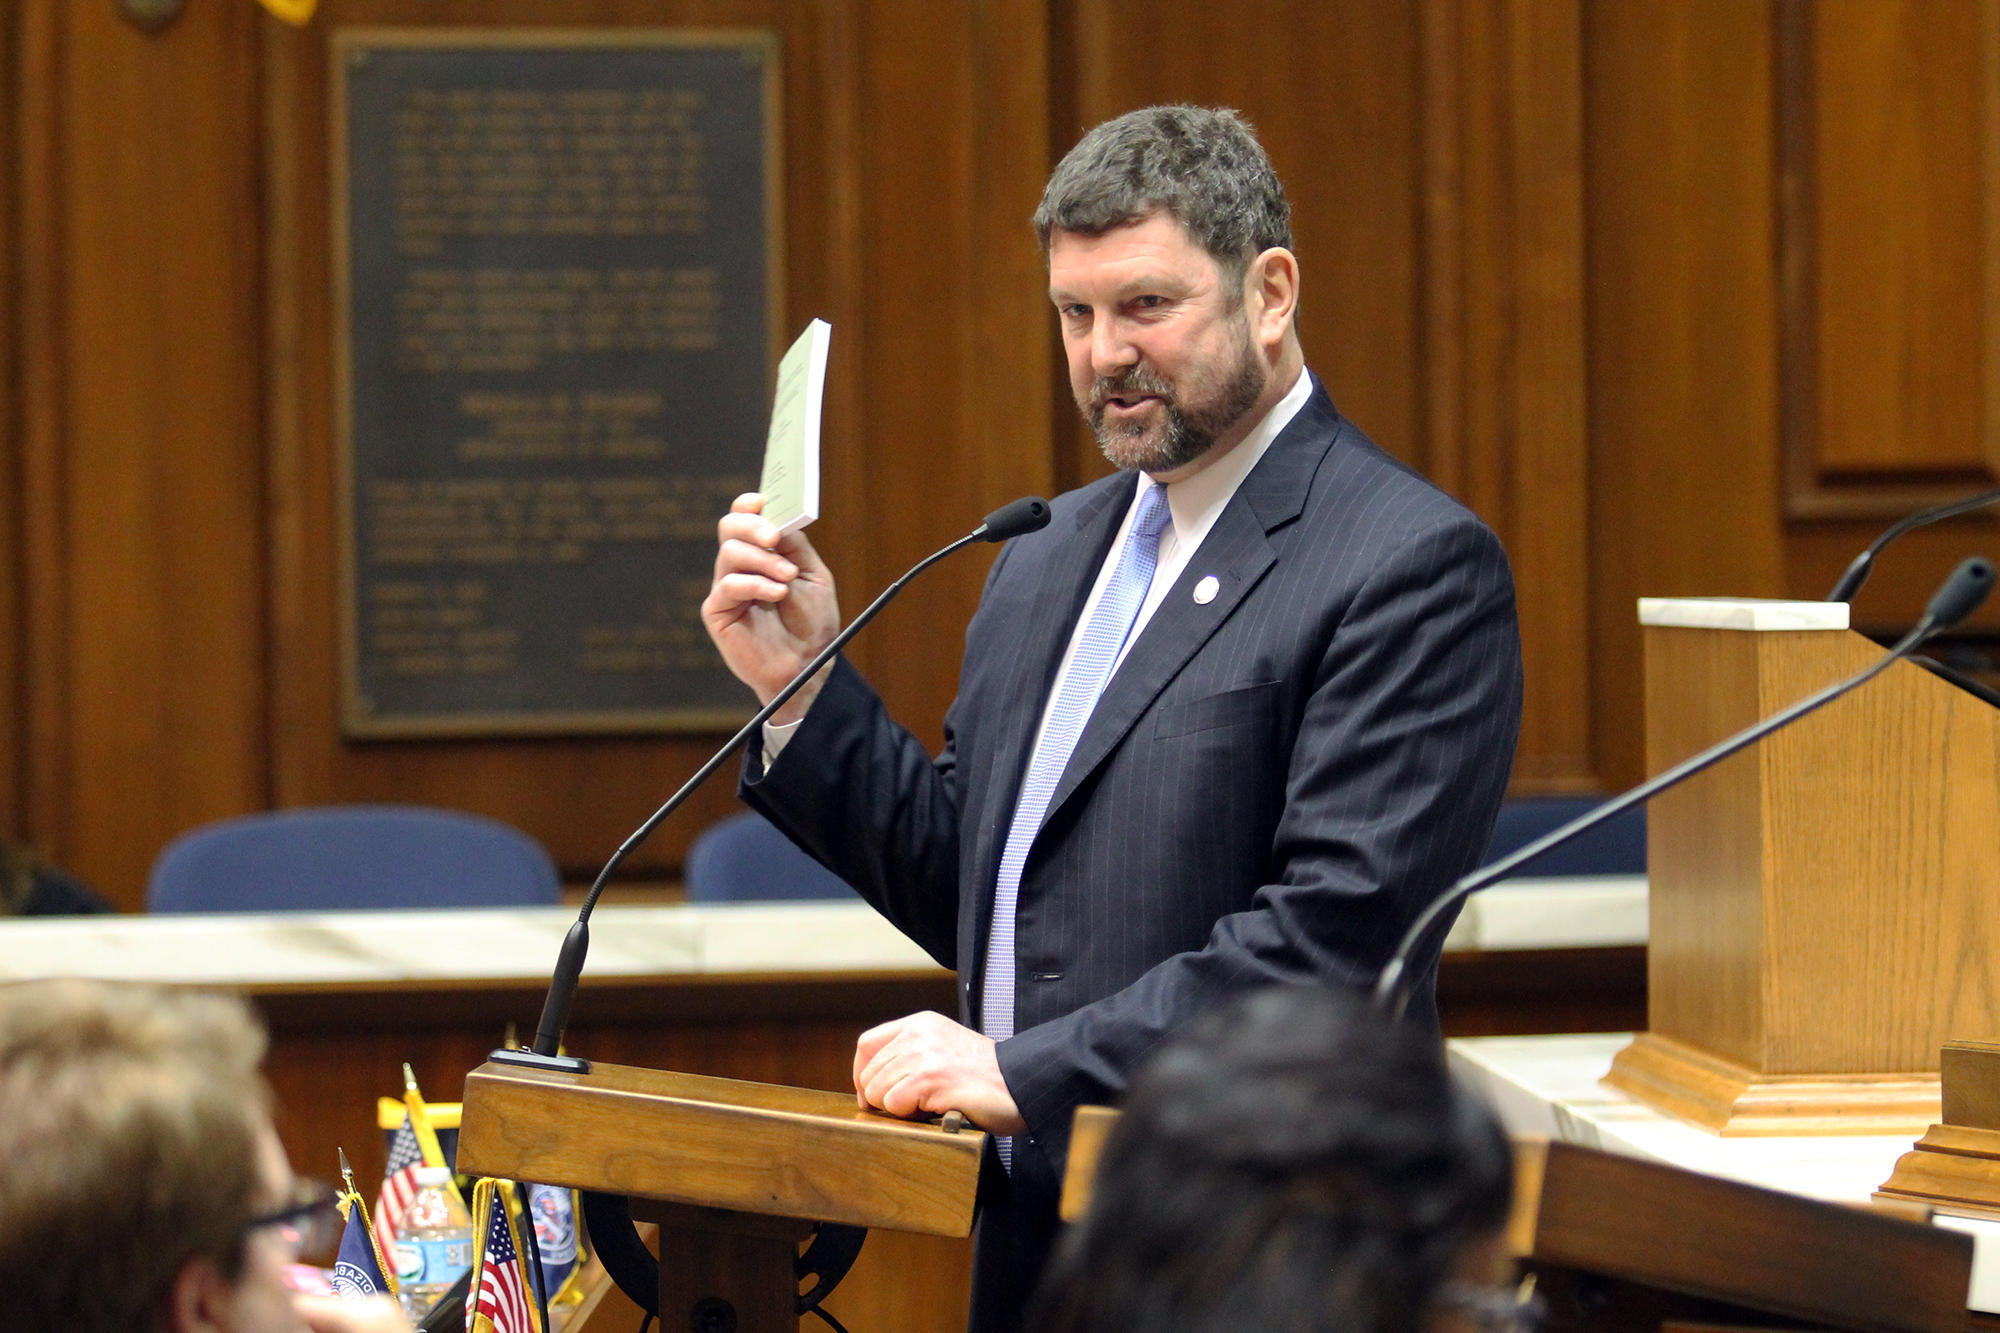 Rep. Jim Lucas speaks at a podium at the Statehouse and holds up a small booklet.